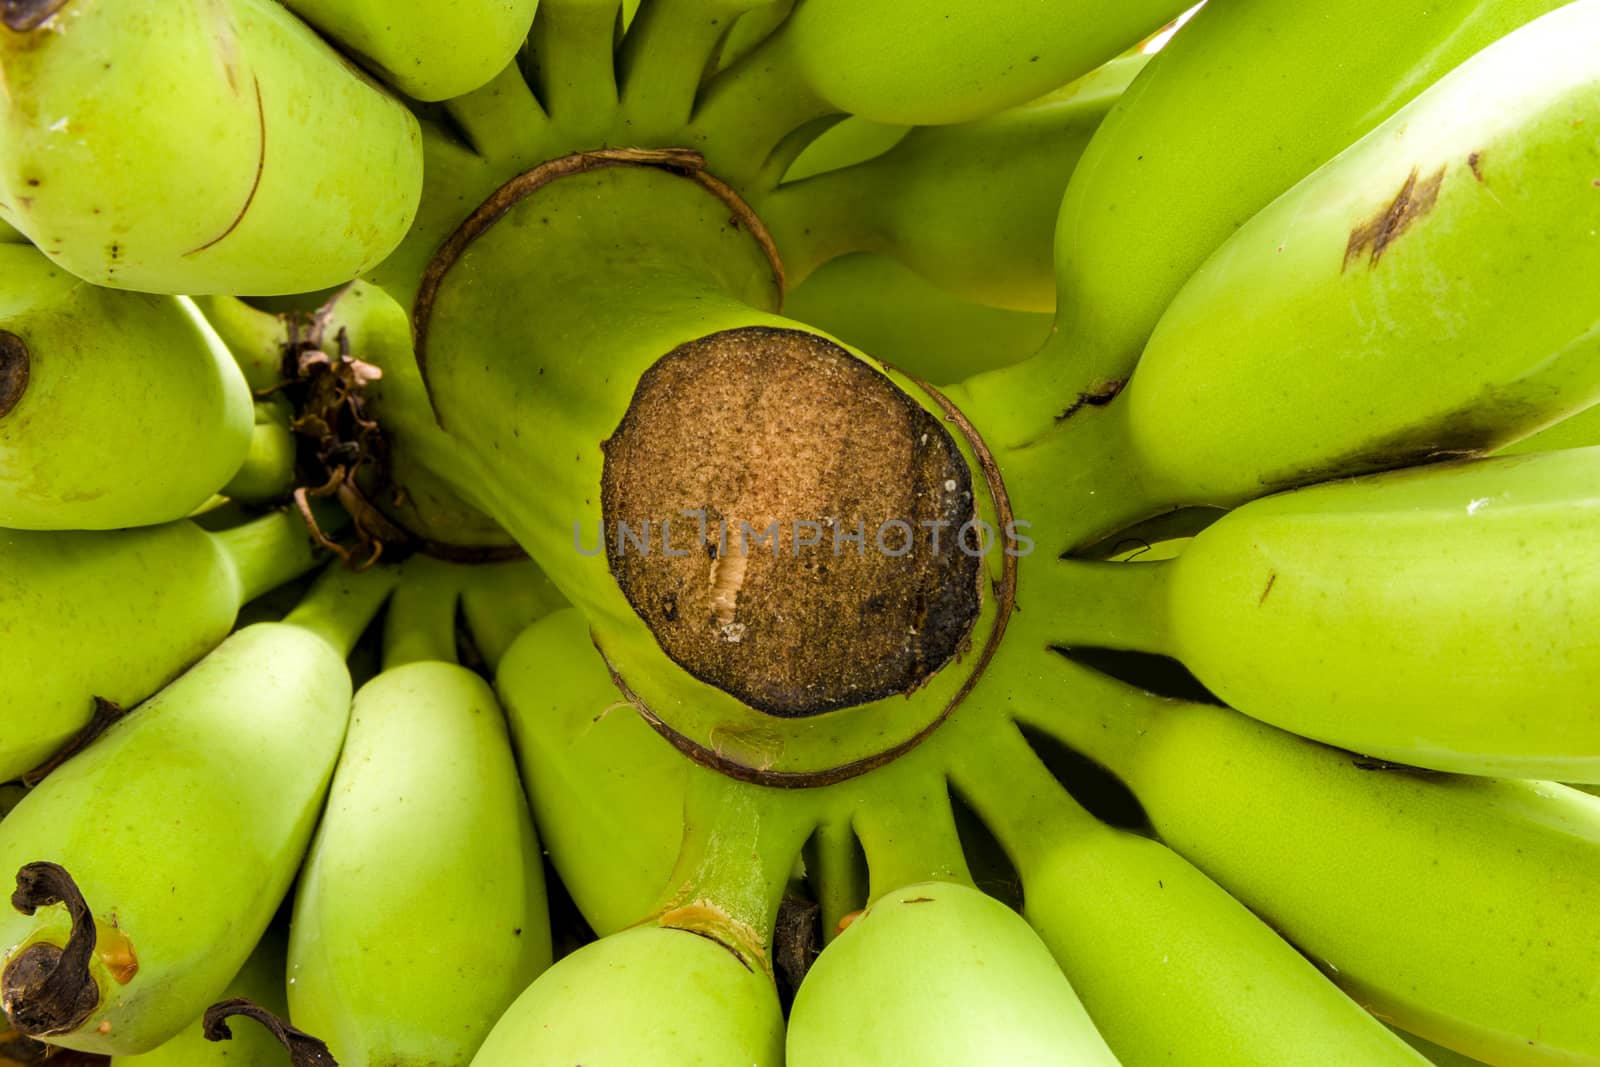 Bunch of unripe banana on wooden background.